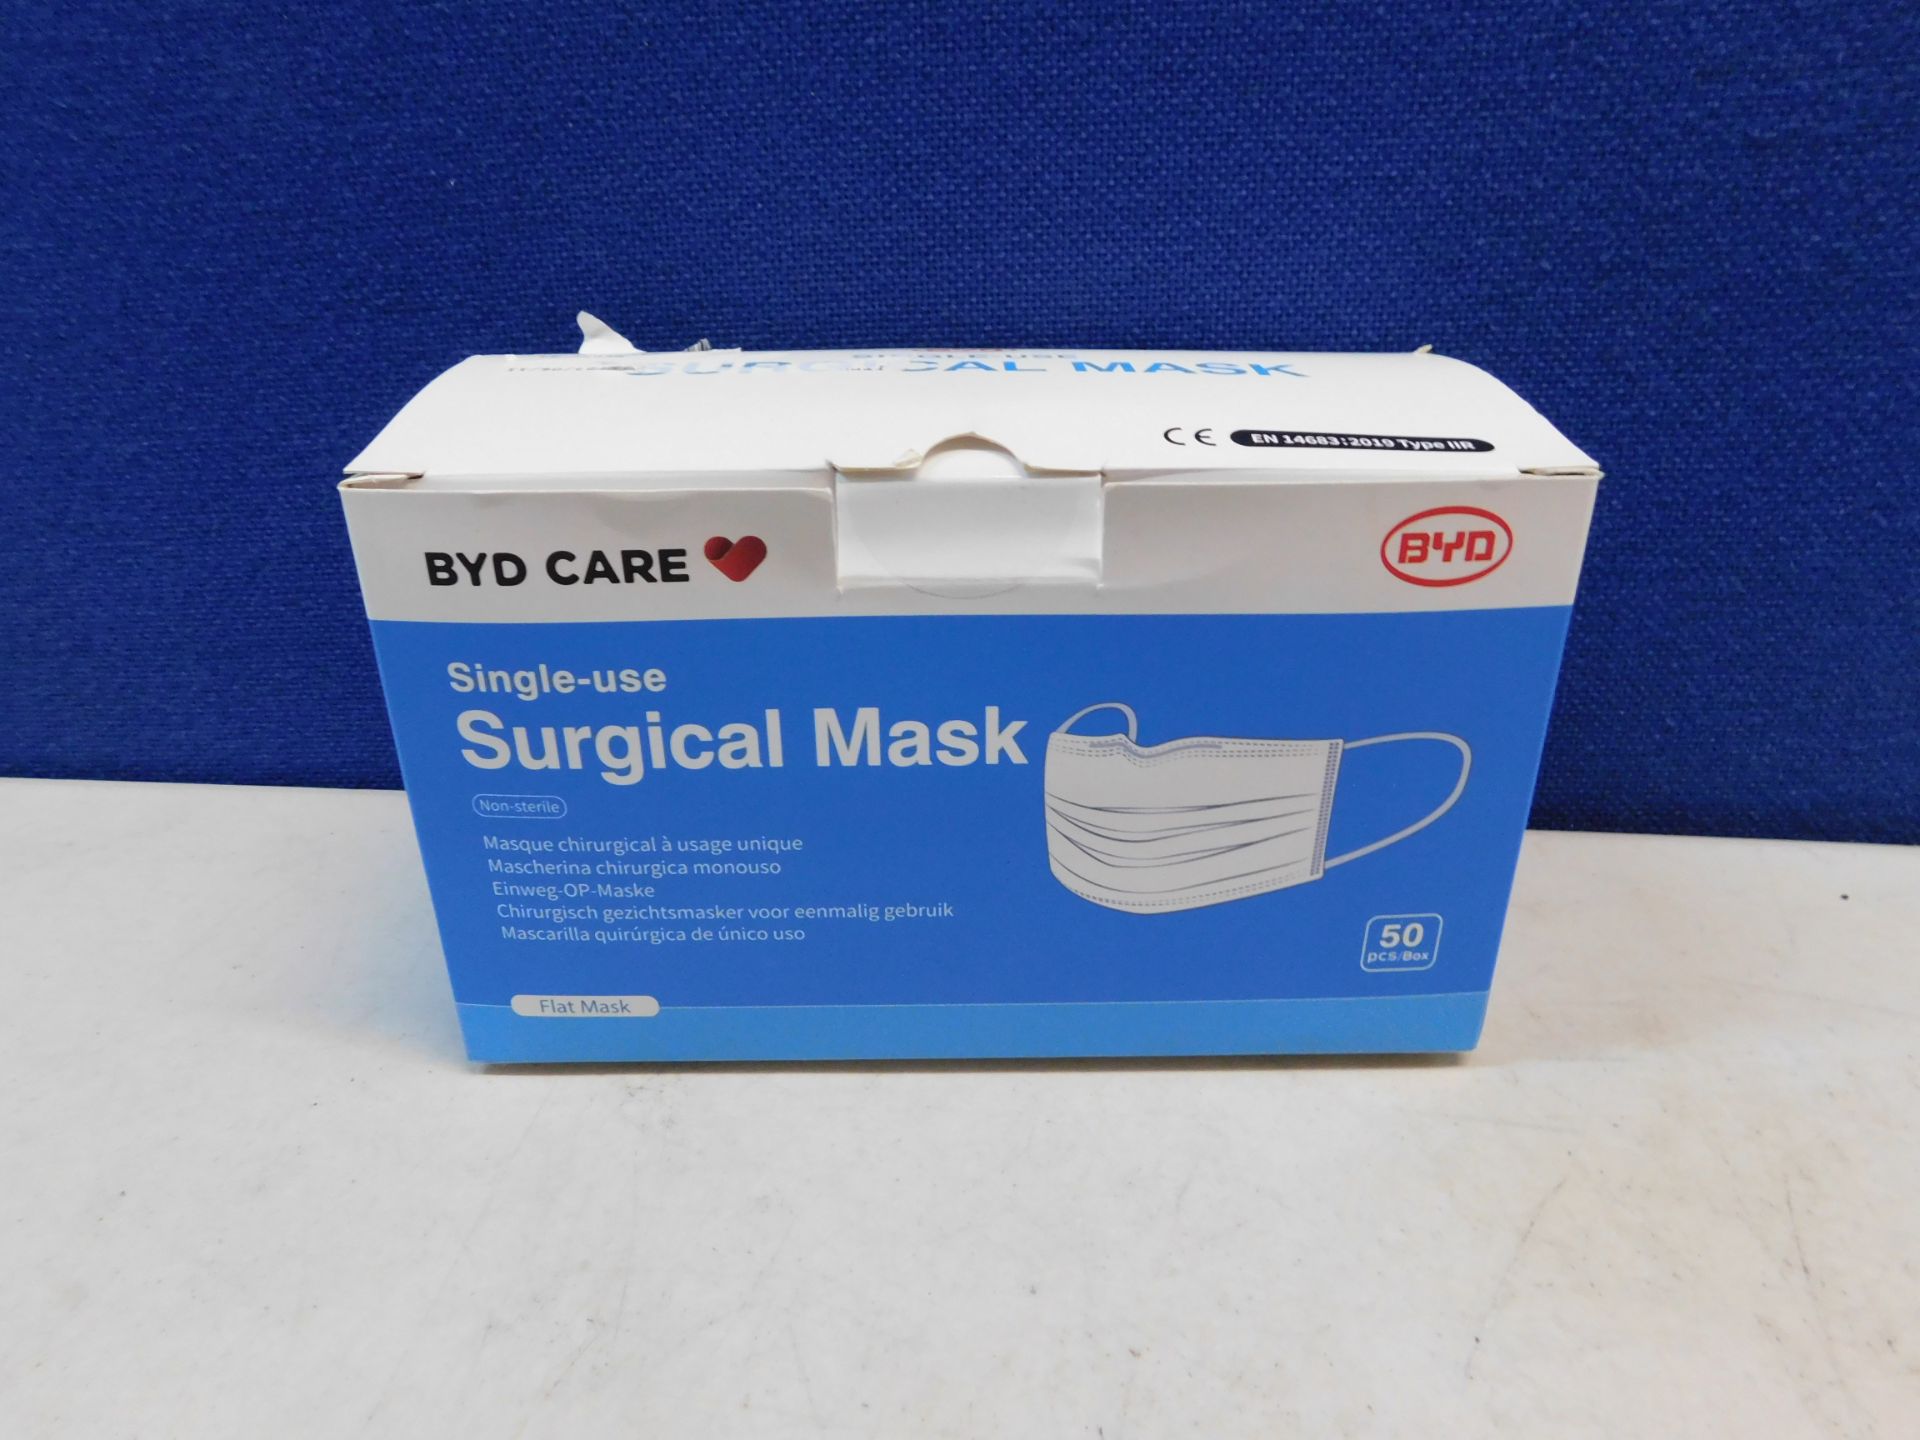 1 BOXED BYD CARE SINGLE-USE SURGICAL MASK 40PC RRP Â£19.99